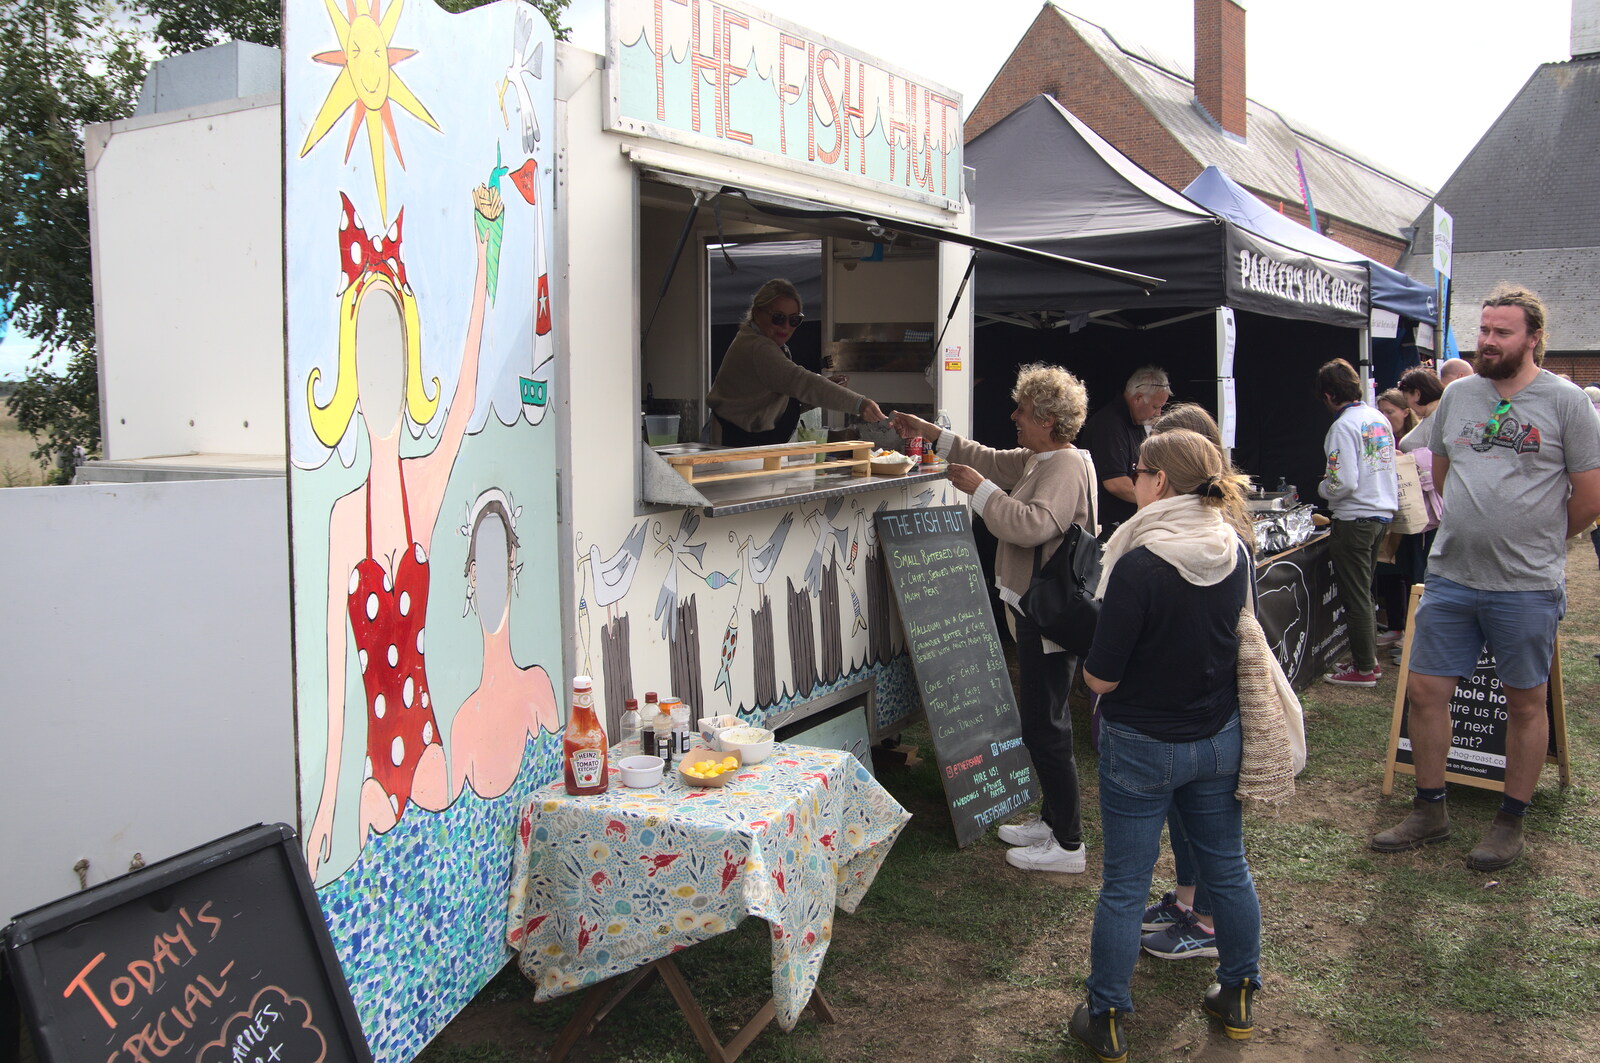 The Fish Hut van, next to our queue from The Aldeburgh Food Festival, Snape Maltings, Suffolk - 25th September 2022